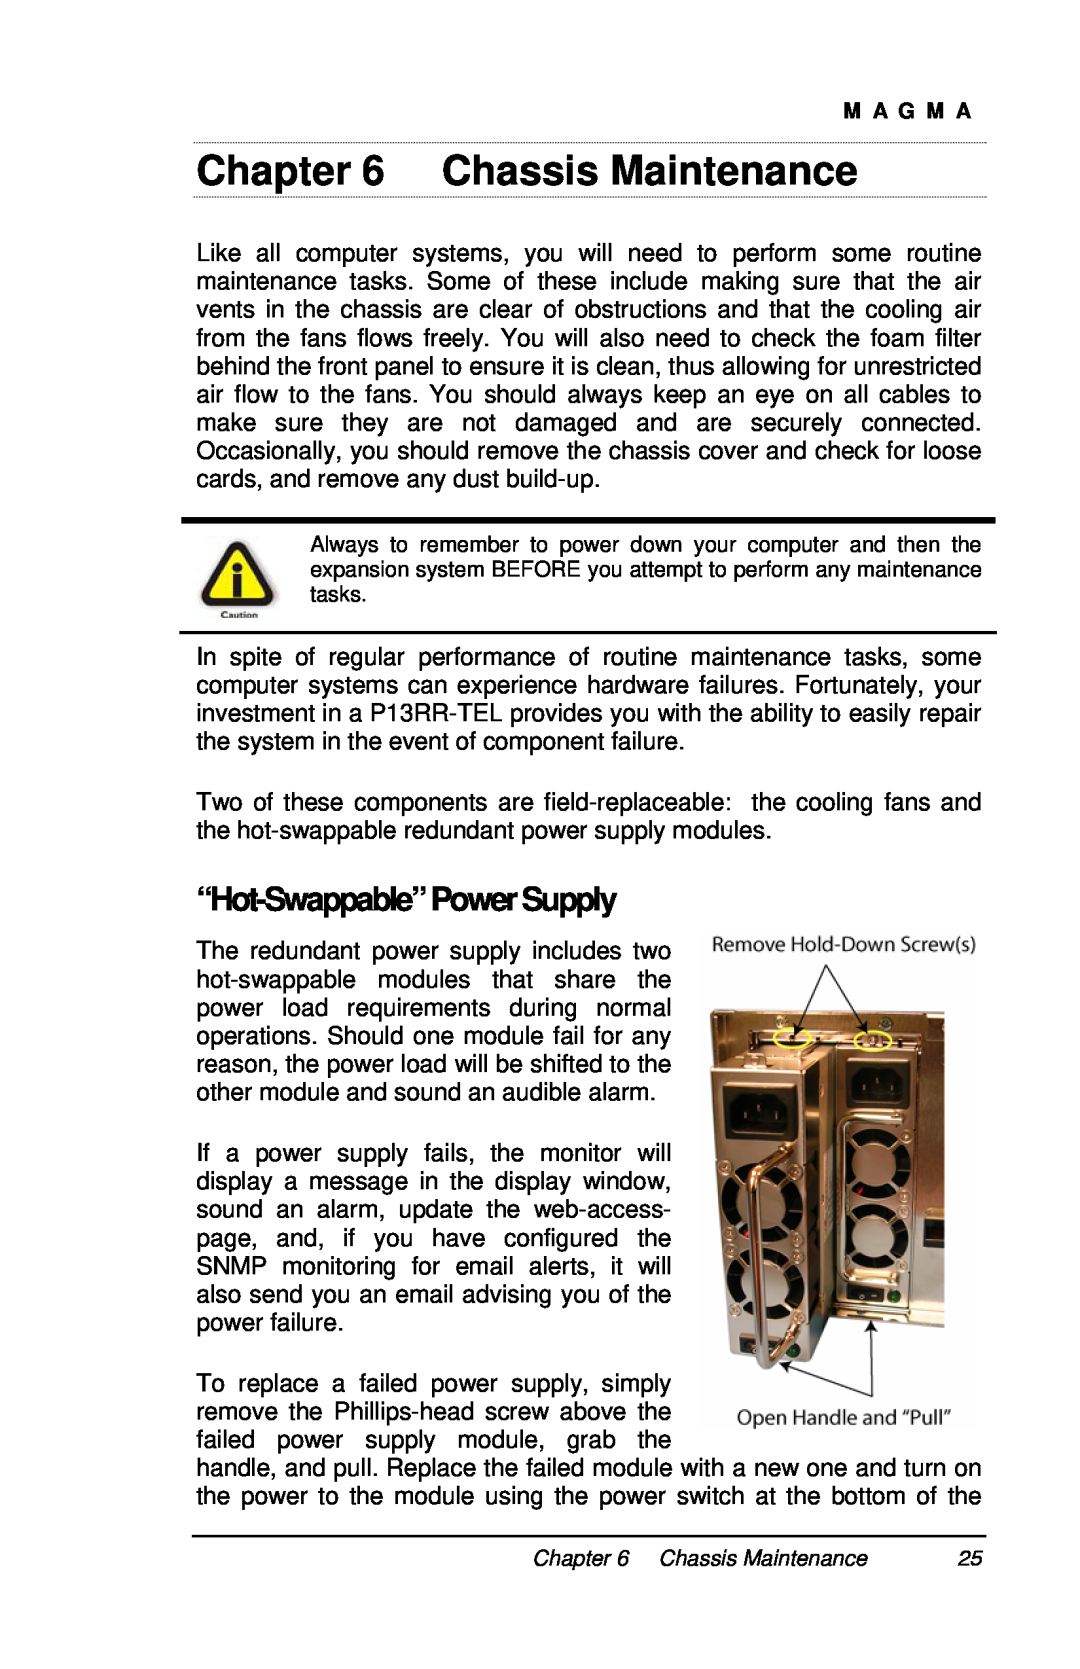 Magma P13RR-TEL user manual Chassis Maintenance, “Hot-Swappable”PowerSupply 